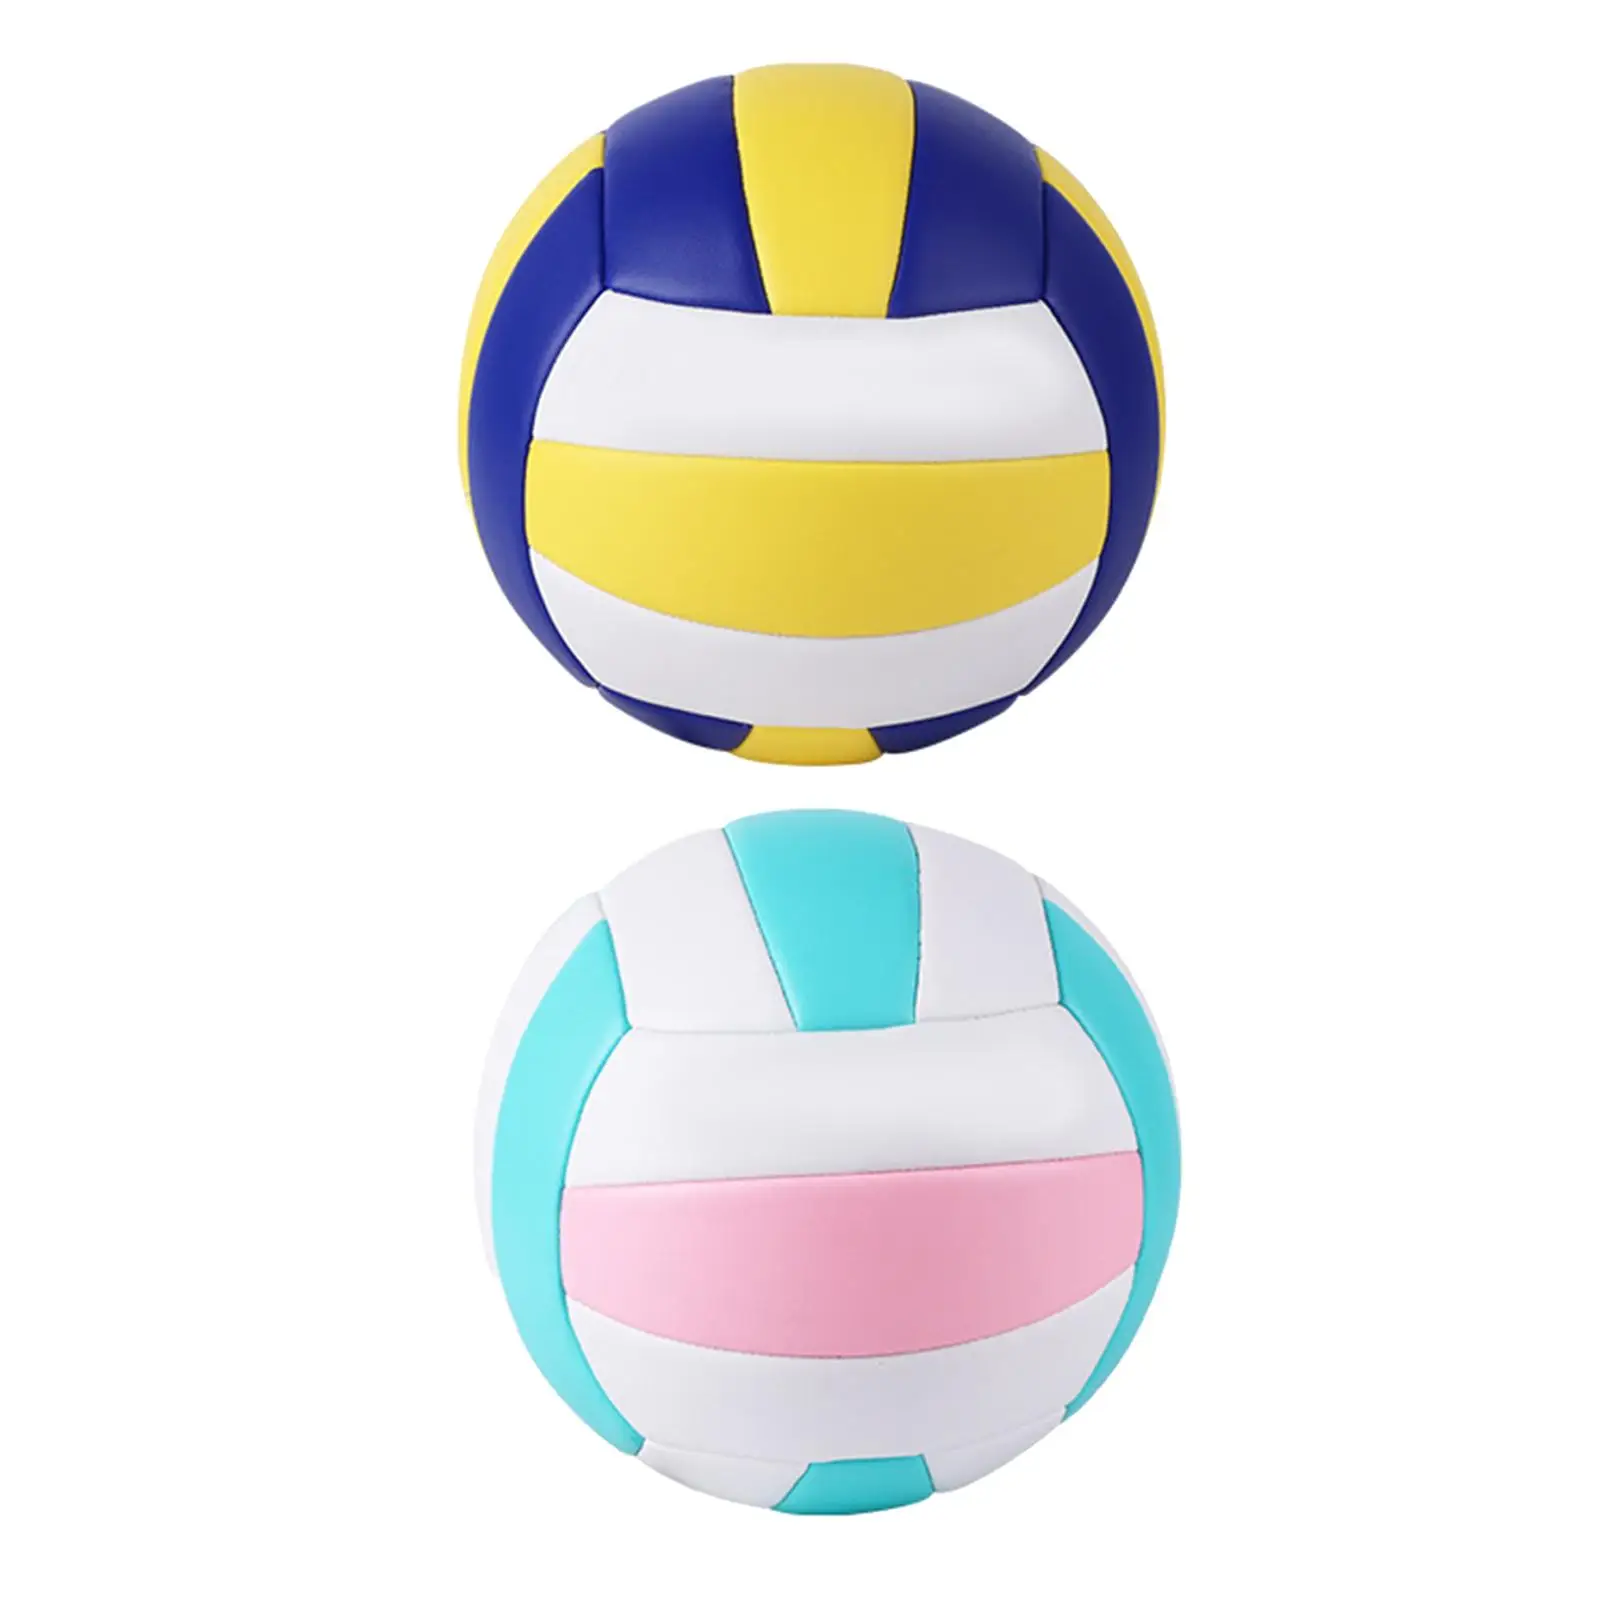 Size 5 Indoor Volleyball PU Leather Recreational Ball Beach Game Gym Beginner Adult